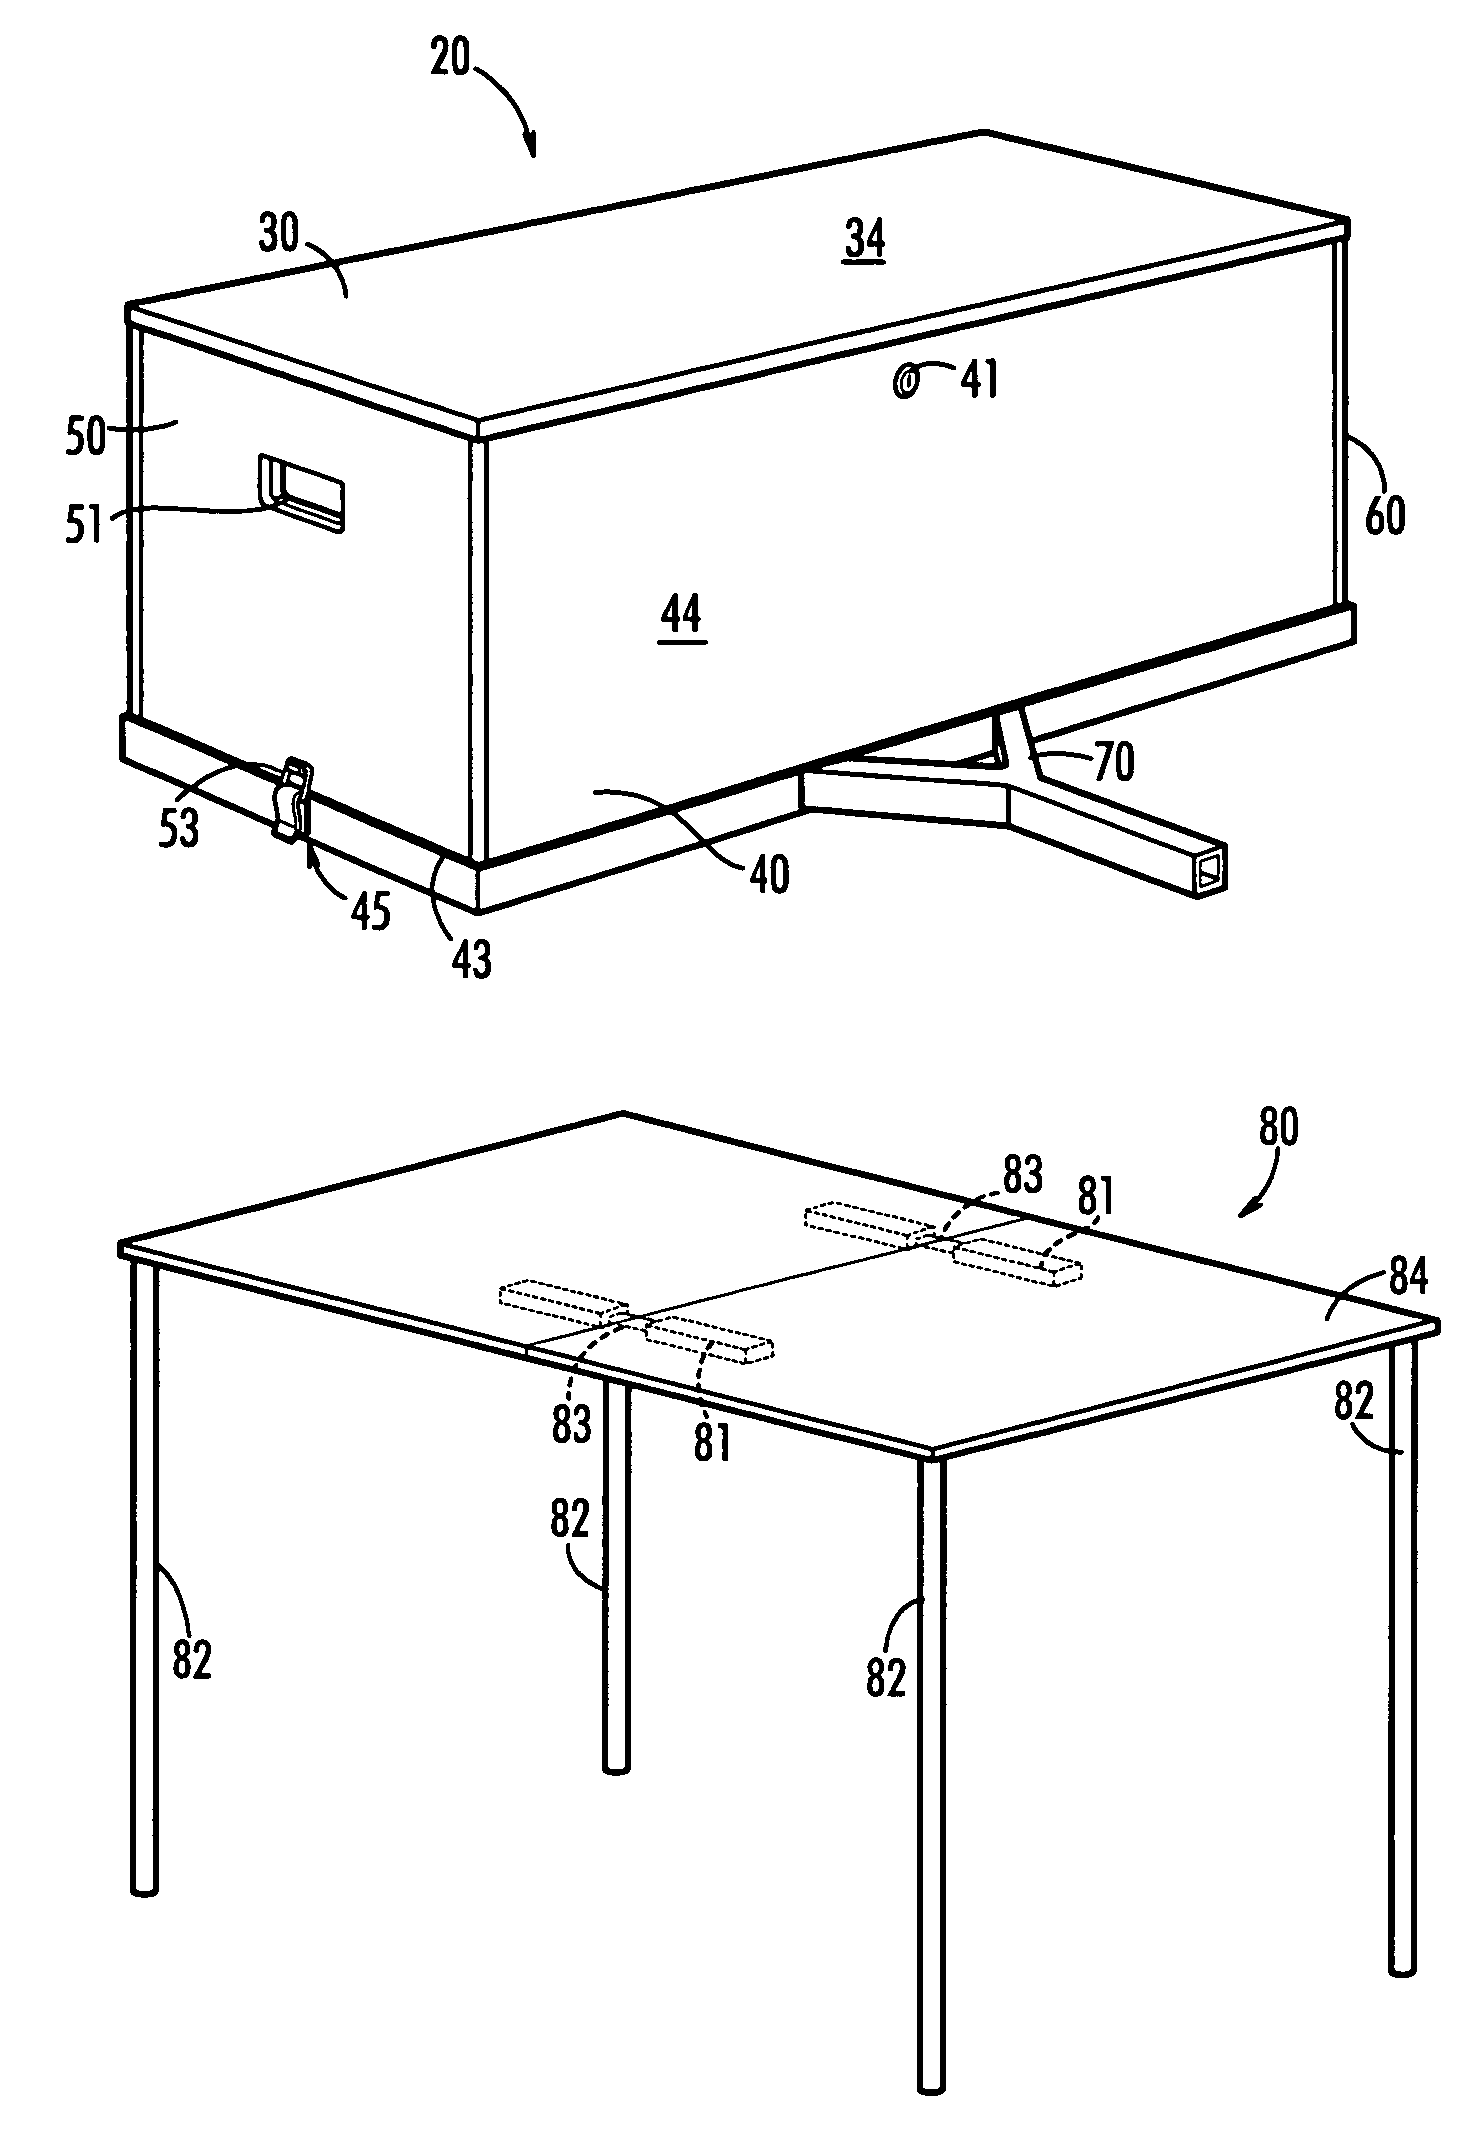 Convertible cargo container system